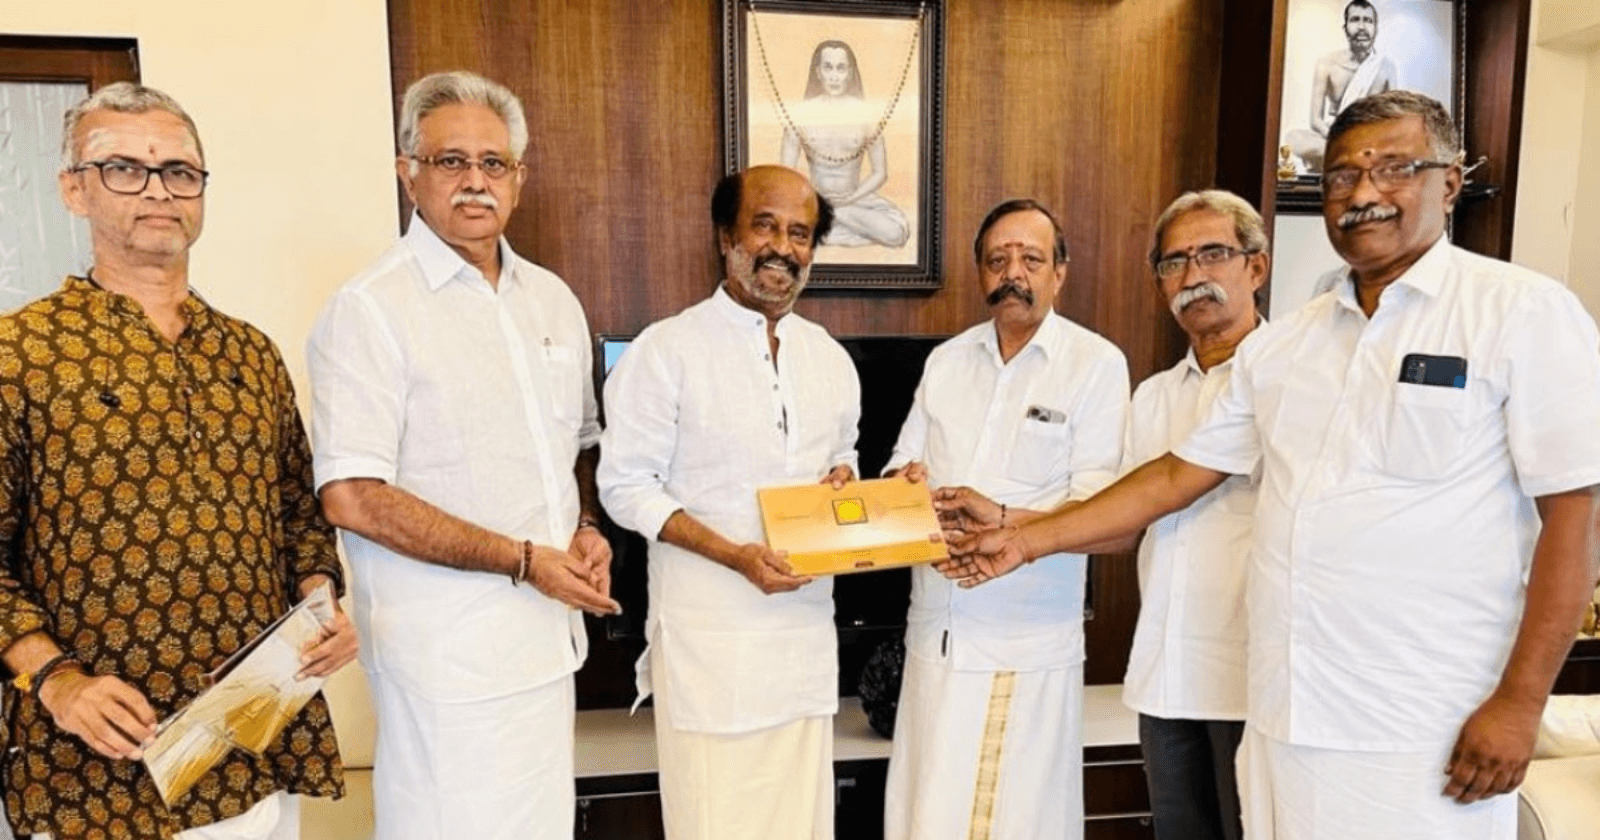 Rajinikanth And Other Celebrities Also Invited